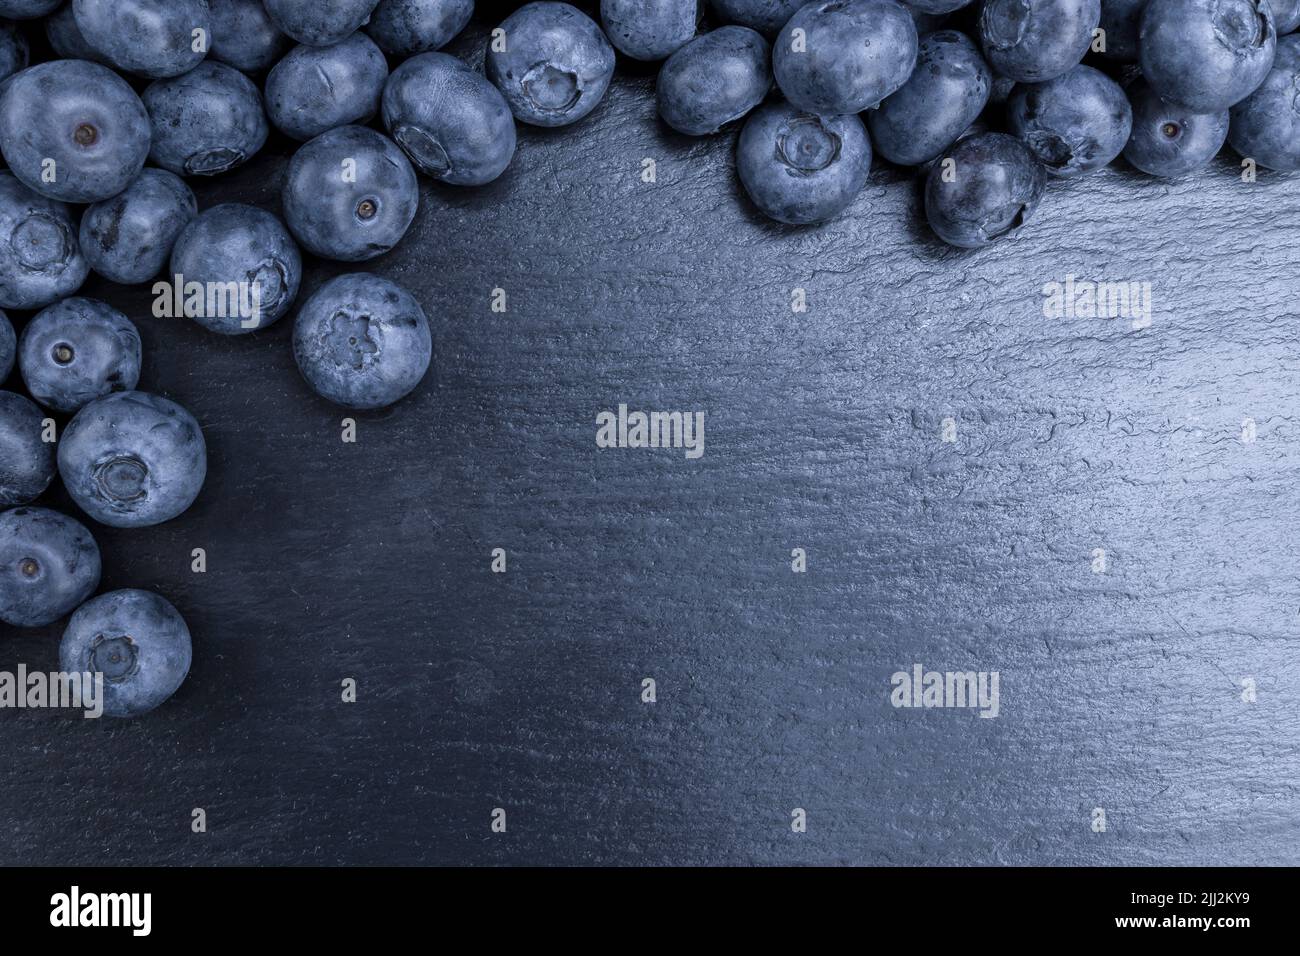 Fresh blueberry summer juicy fruits for a healthy diet. Organic blueberries for a healthy food and life concept. Stock Photo